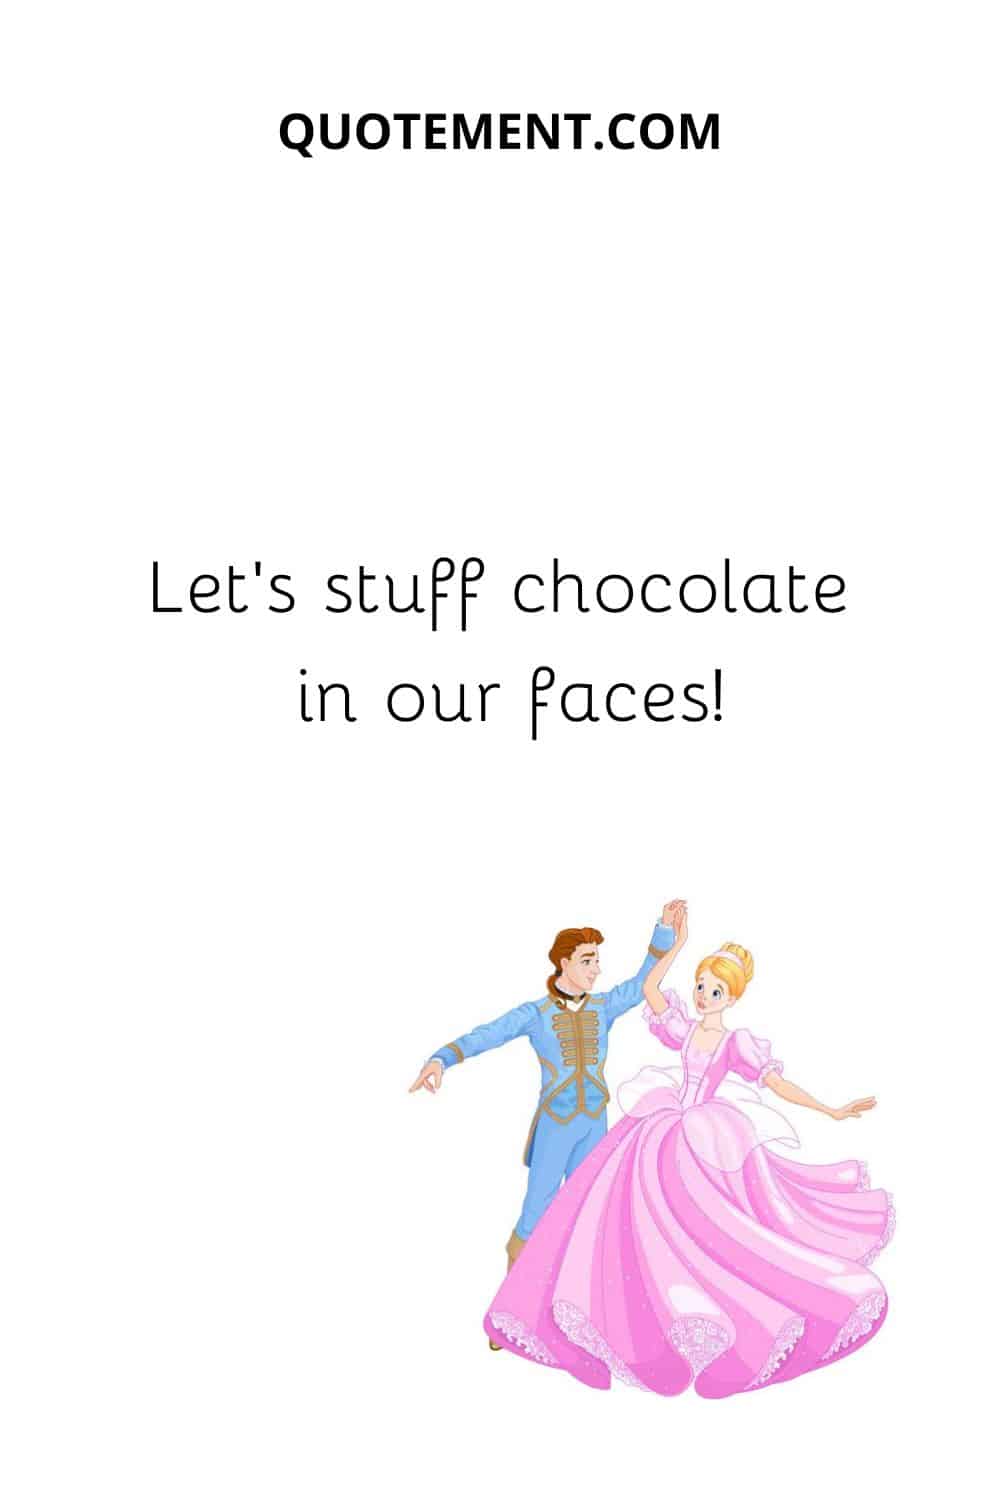 Let's stuff chocolate in our faces!